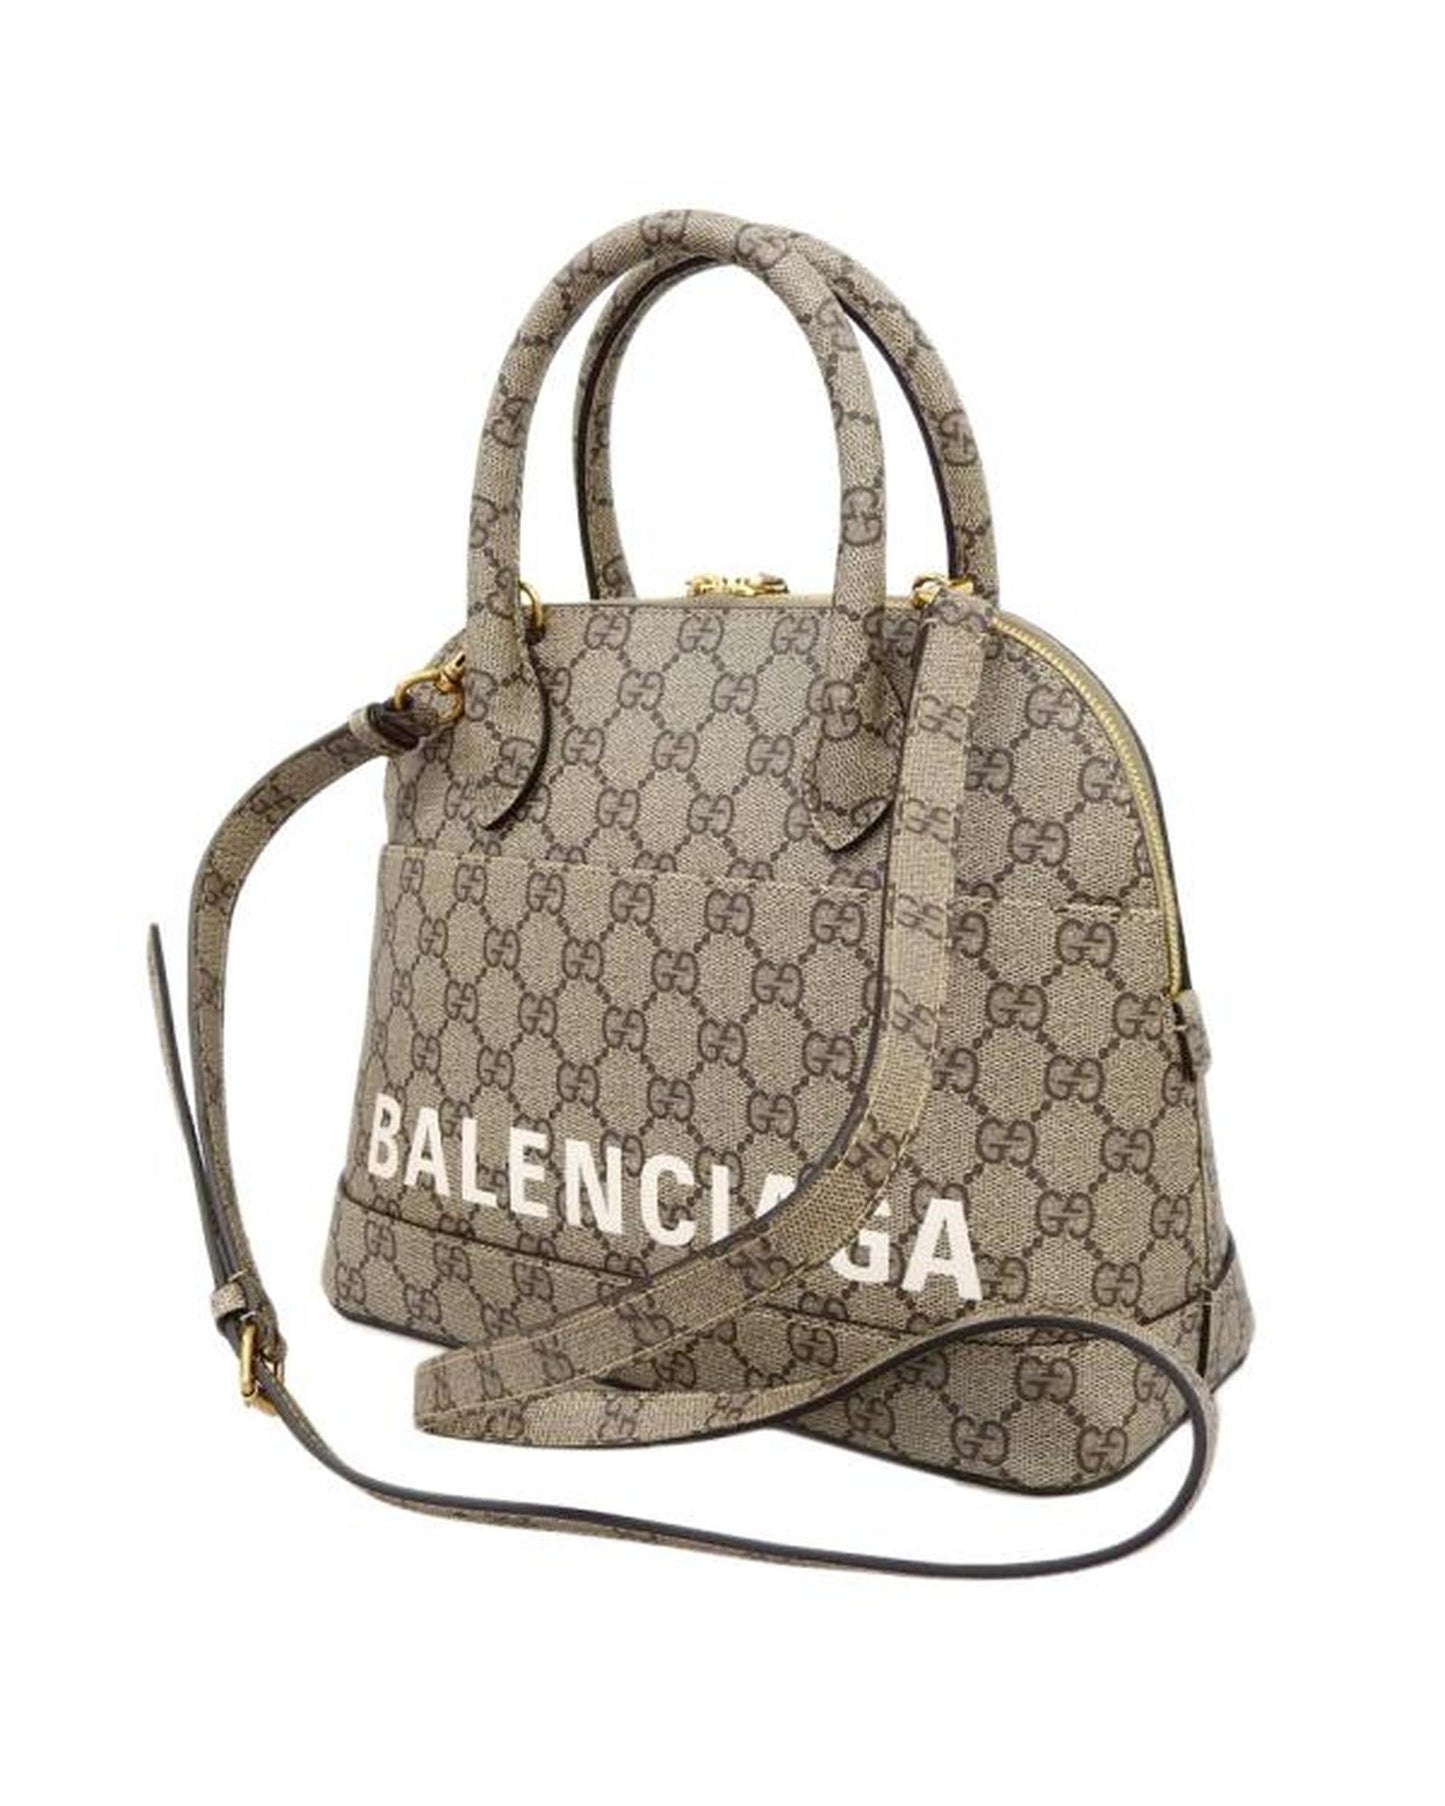 Gucci Women's Medium Beige Ville Bag from The Hacker Project Collection in Beige